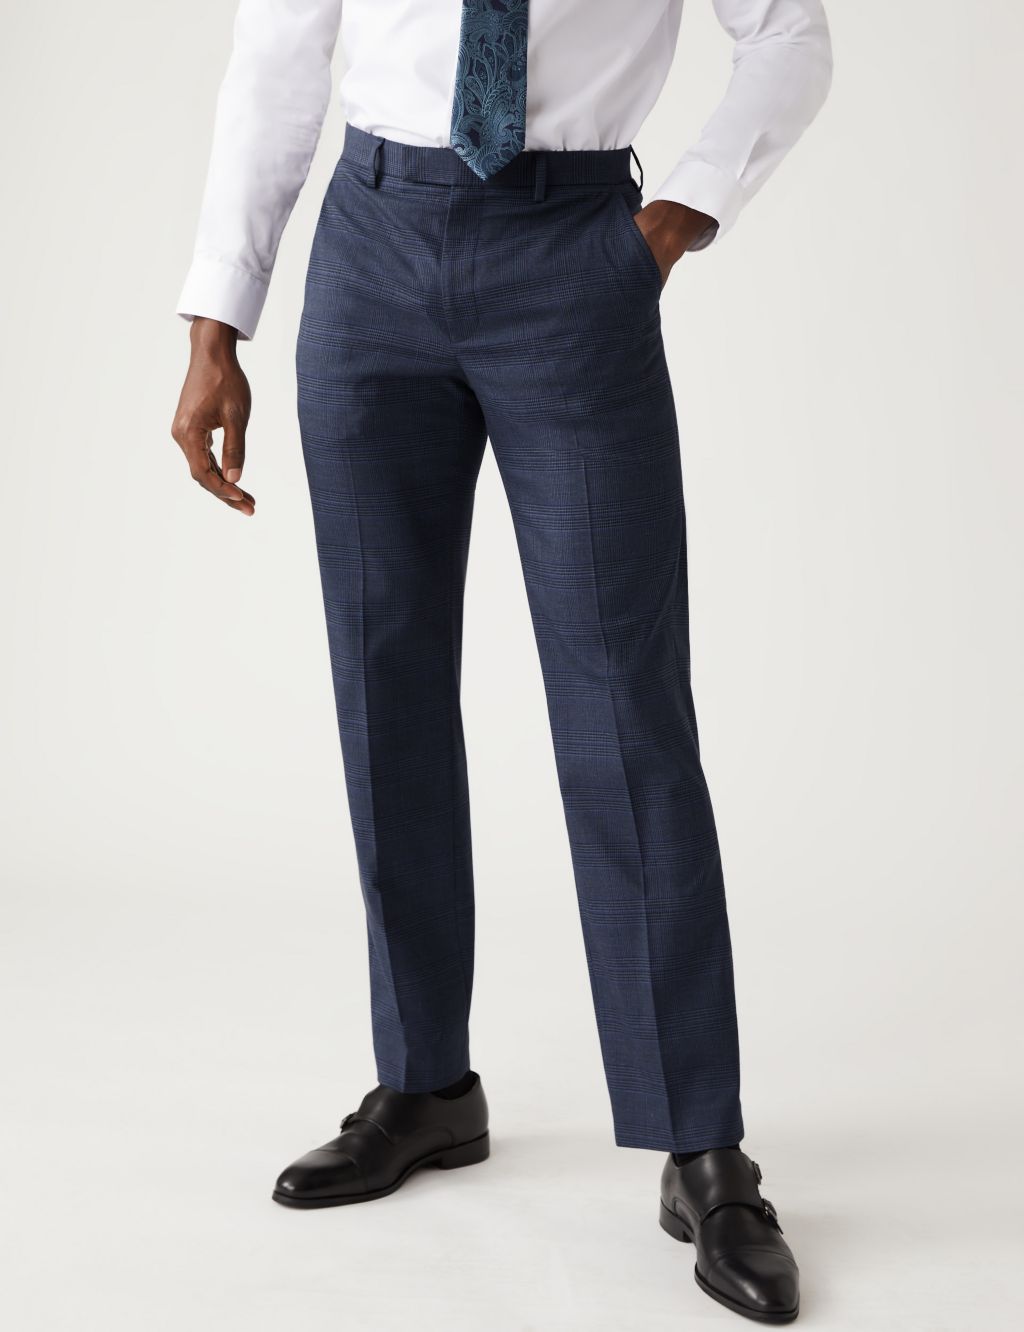 Regular Fit Prince of Wales Check Suit image 4